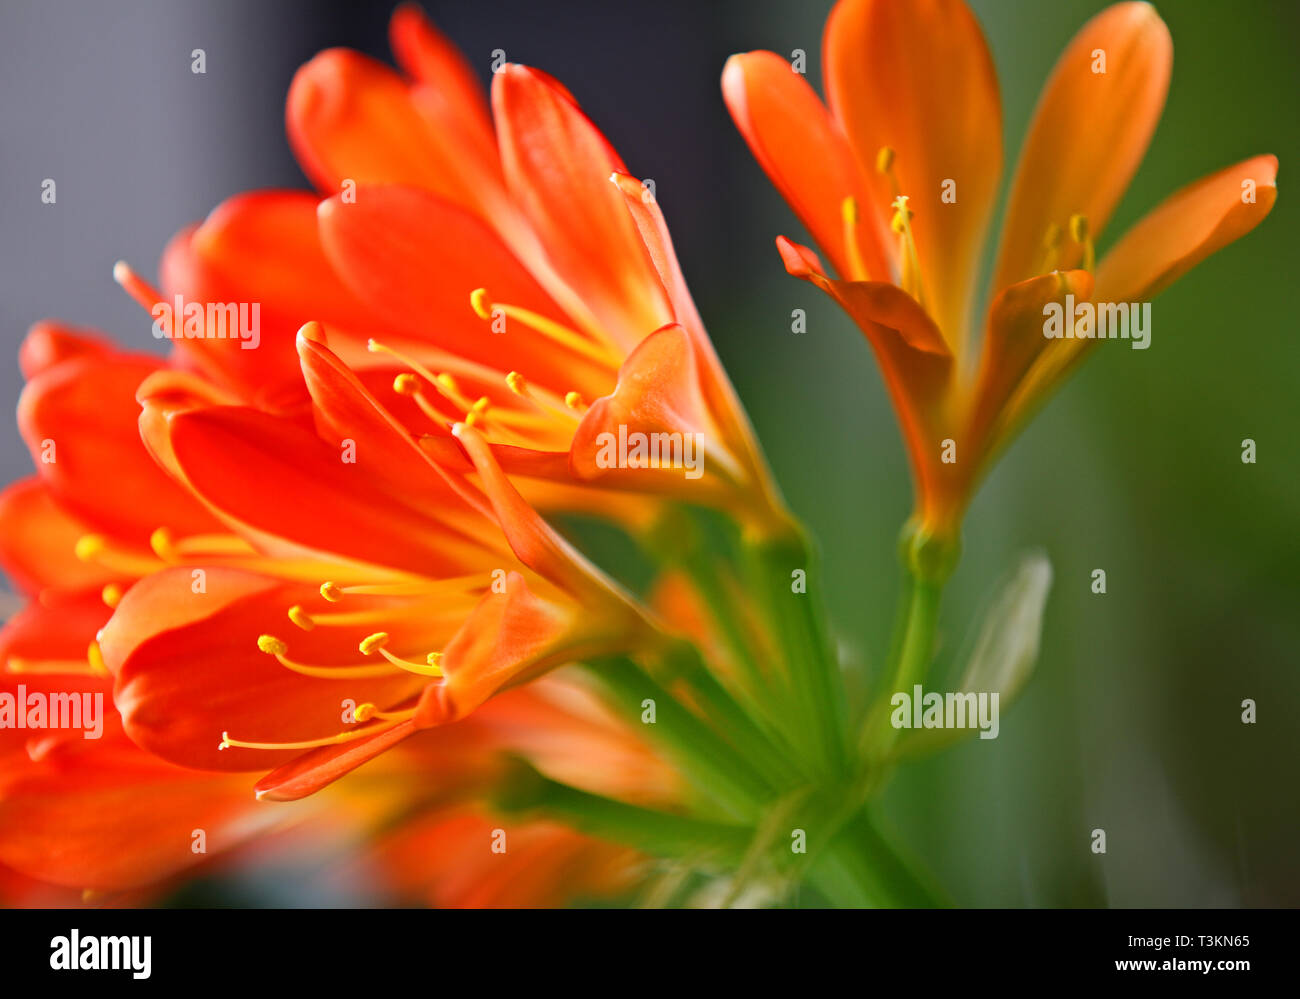 Beautiful clivia blooming with a lot of small orange flowers on a window Stock Photo